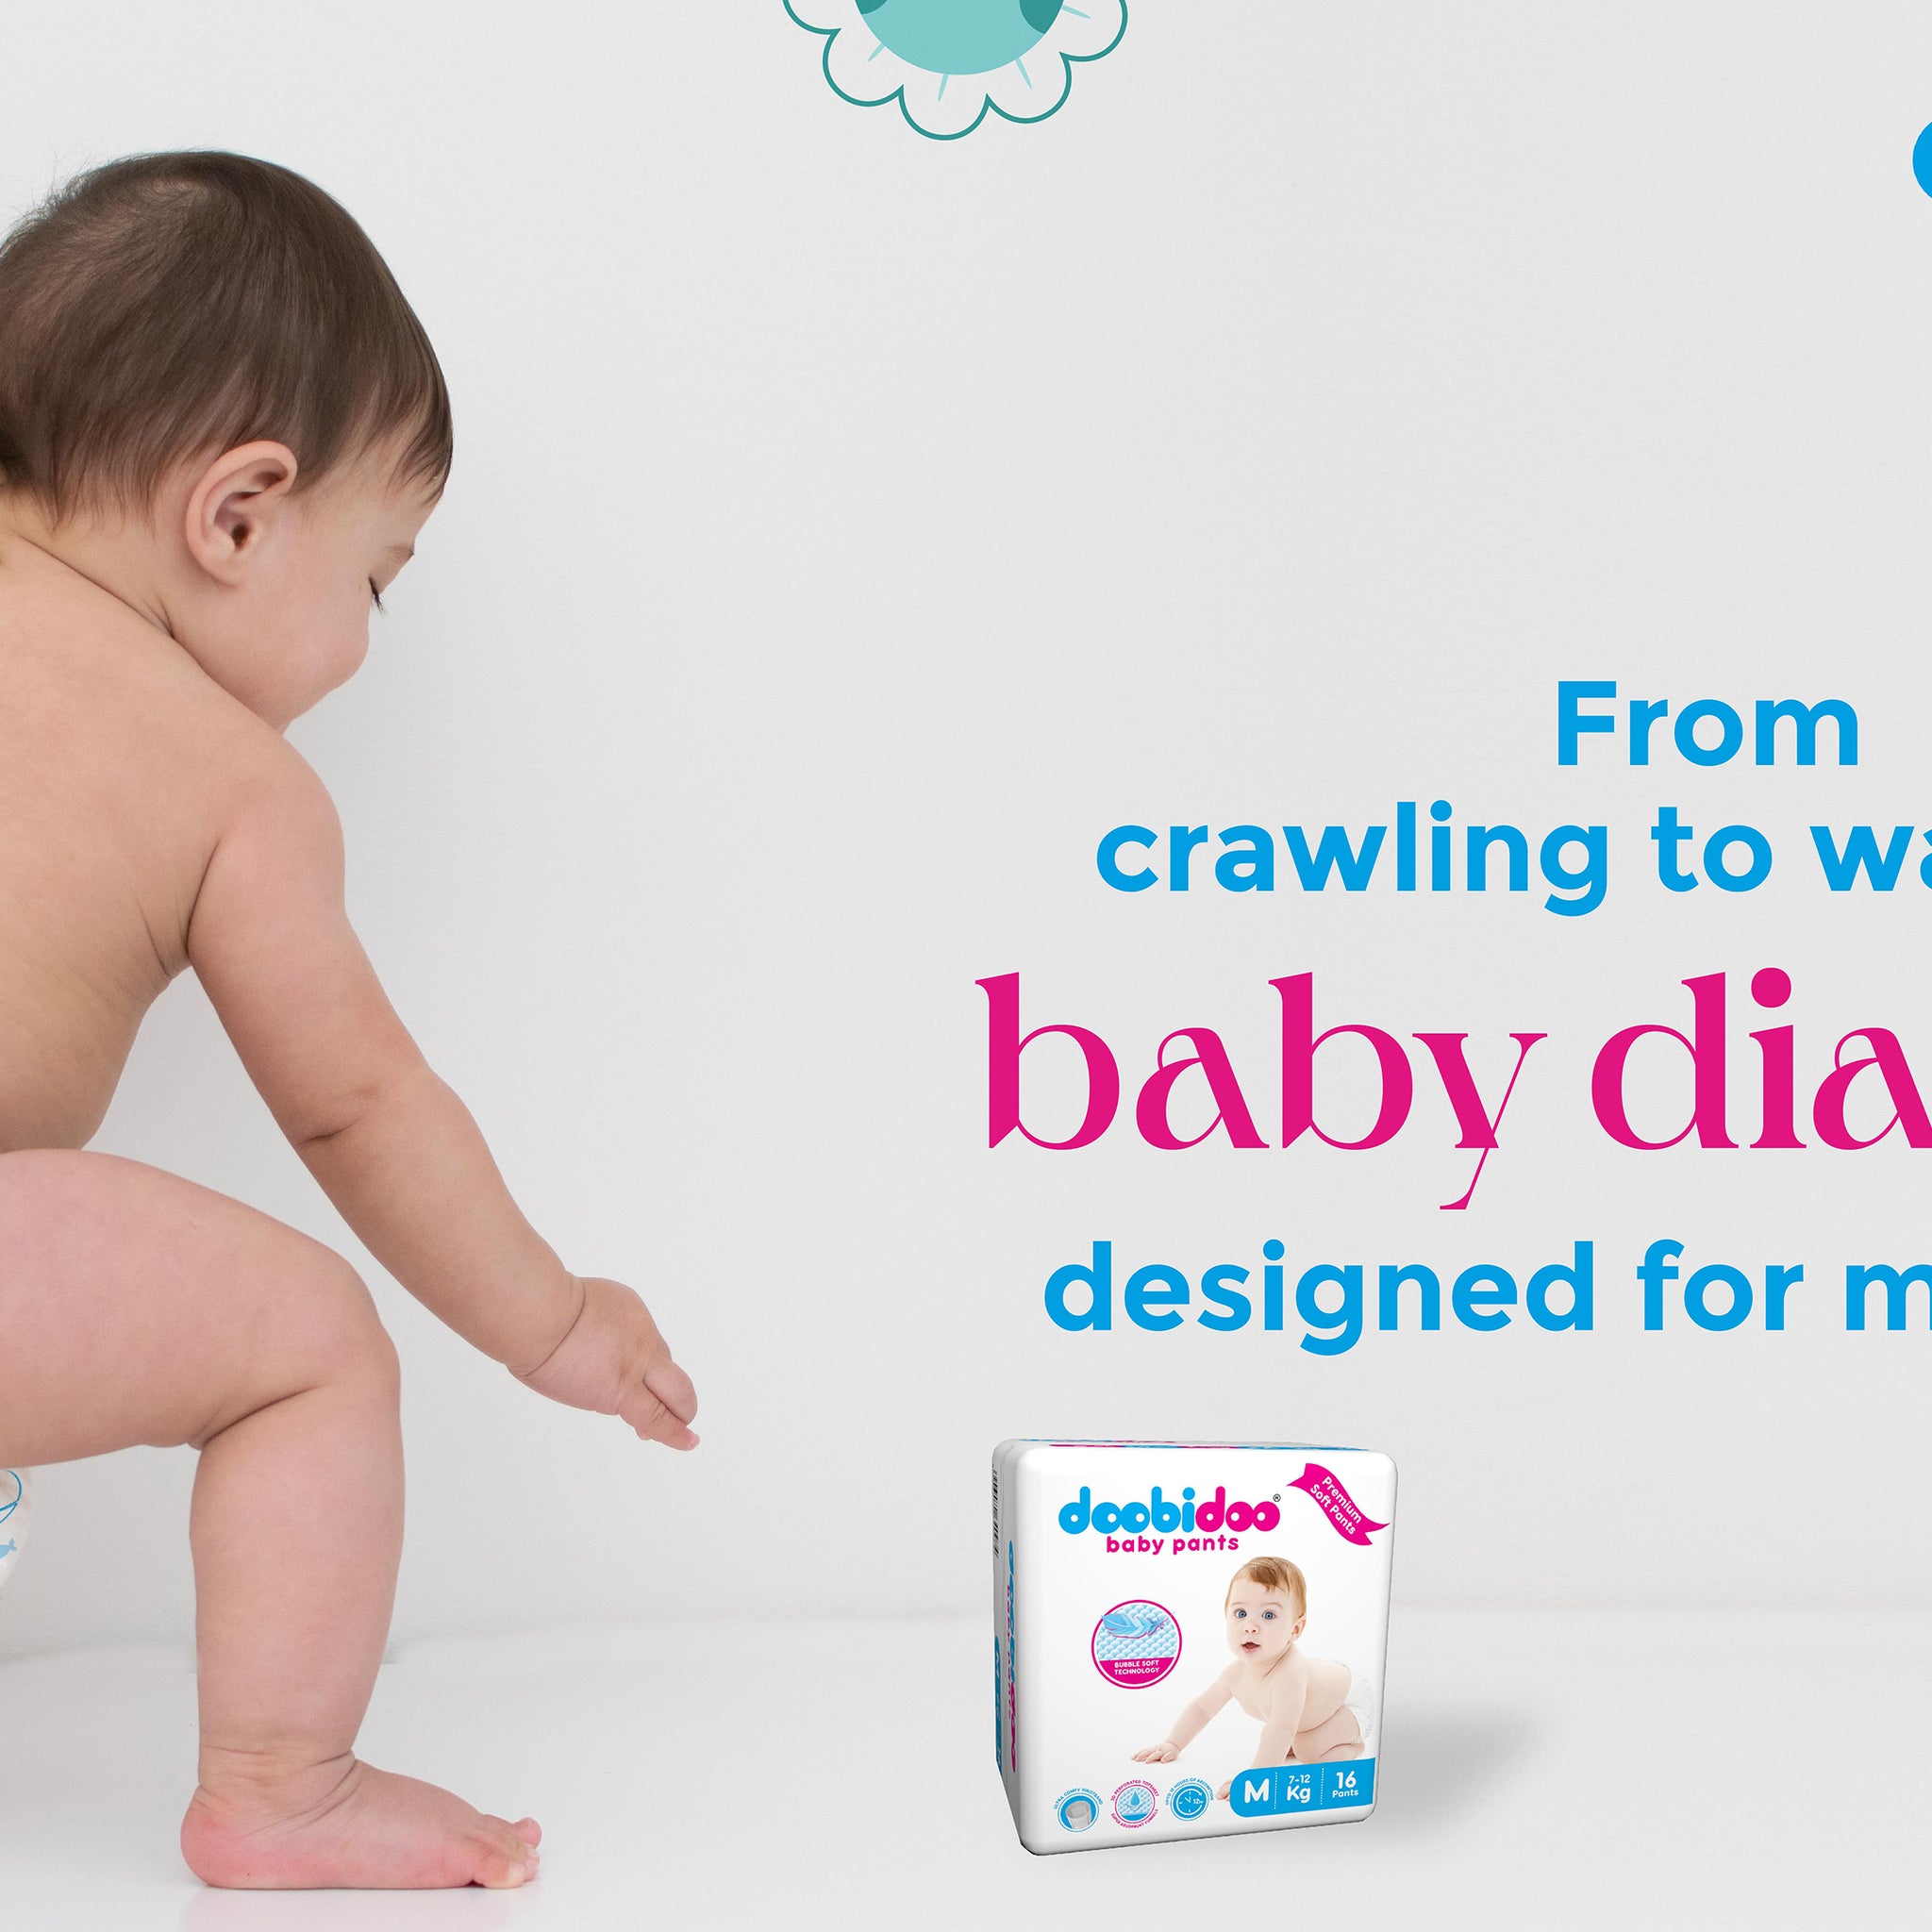 From crawling to walking: Baby diapers designed for mobility